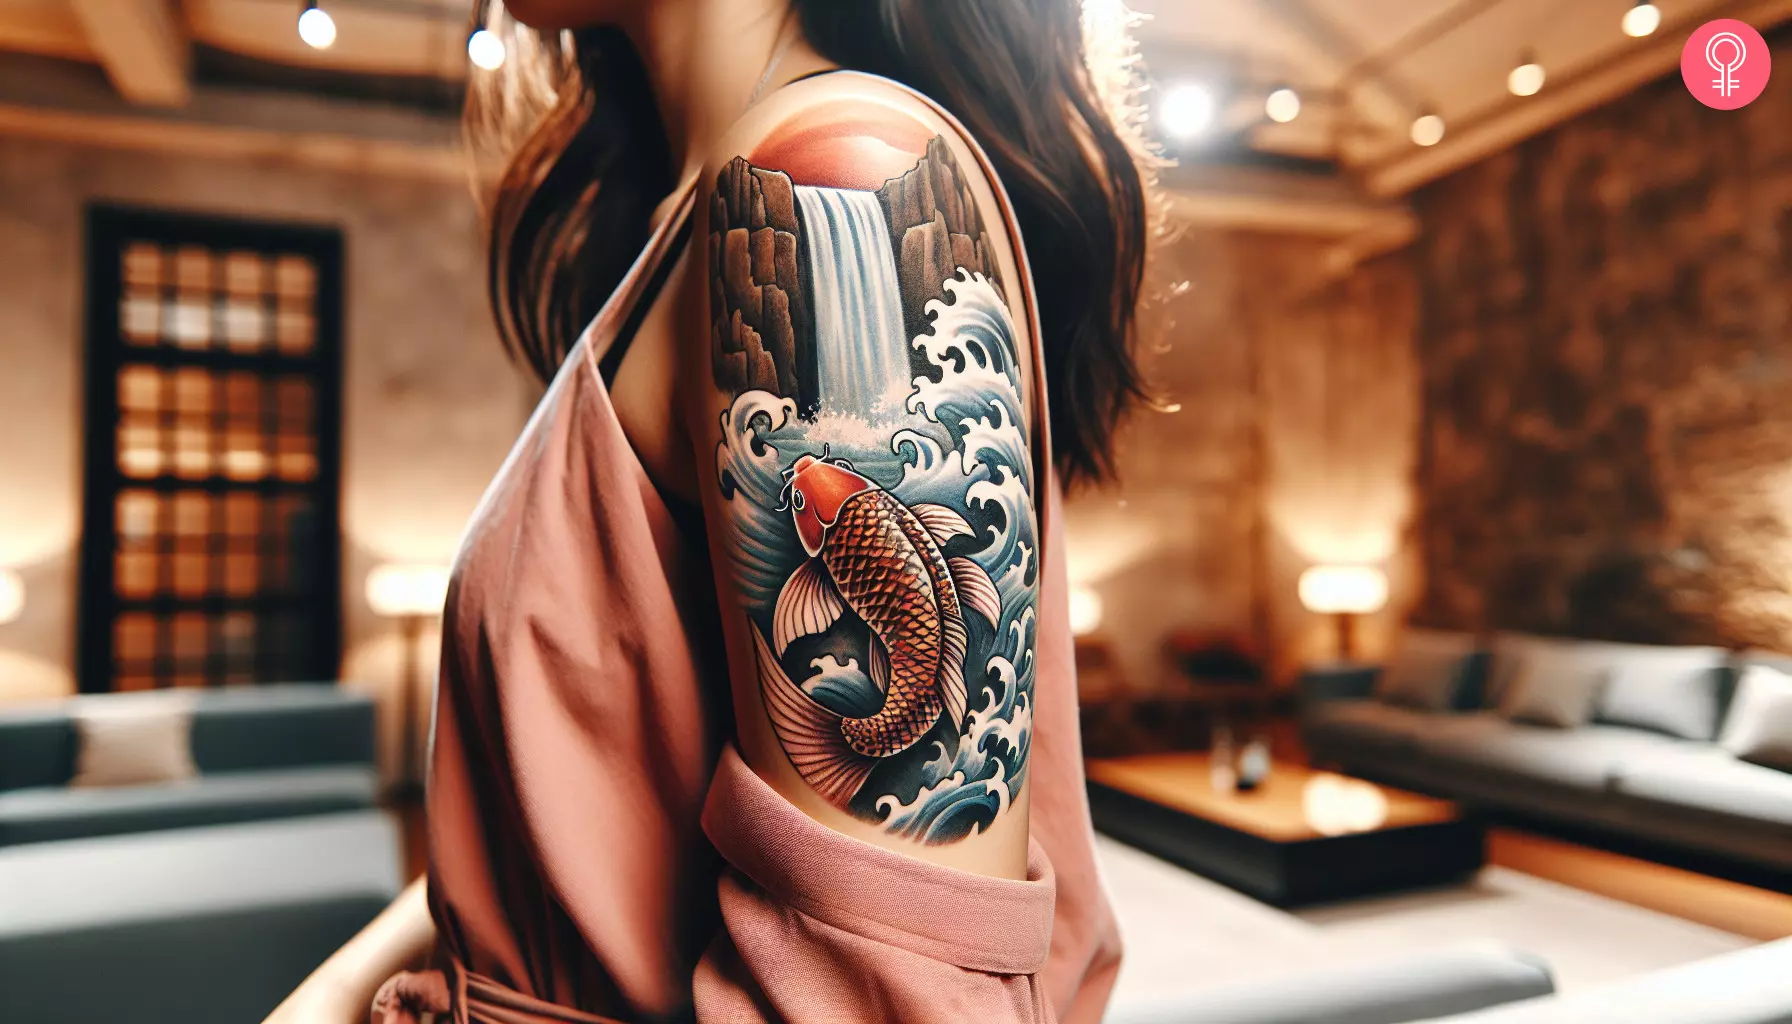 A koi fish swimming up waterfall tattoo on the arm of a woman